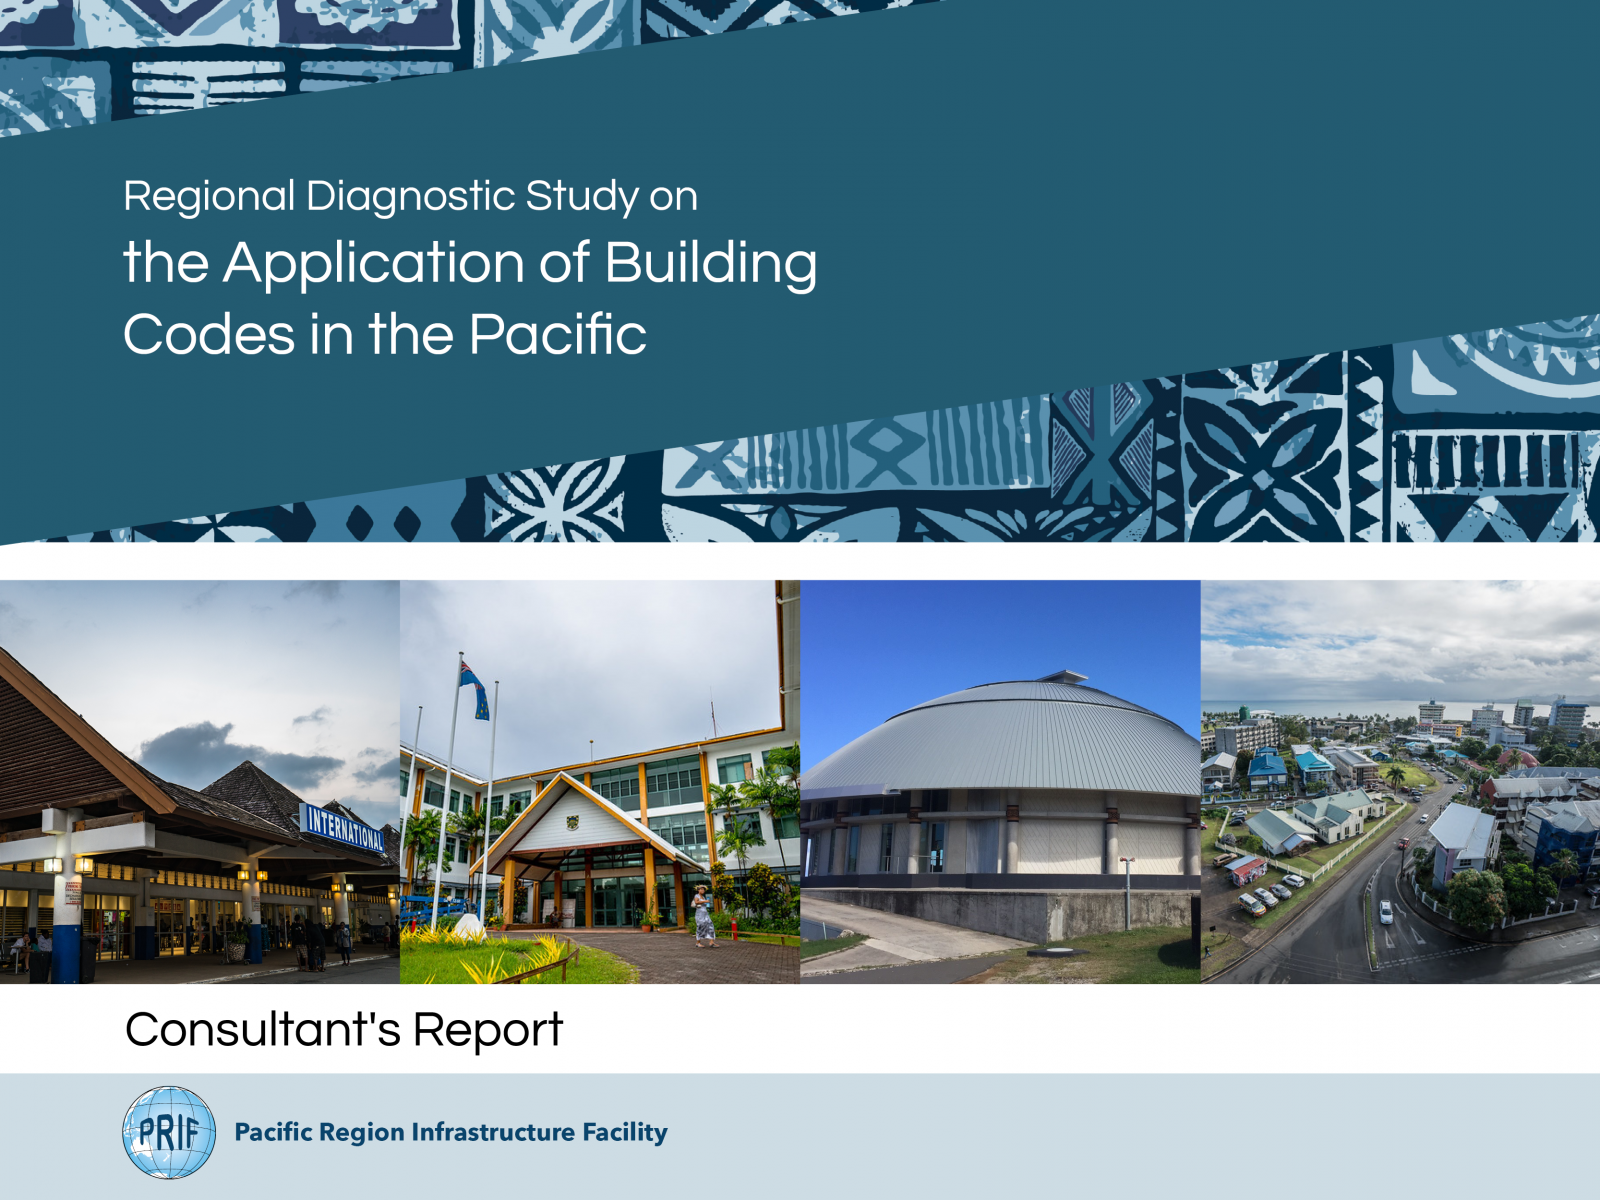 Regional Diagnostic Study on the Application of Building Codes in the Pacific